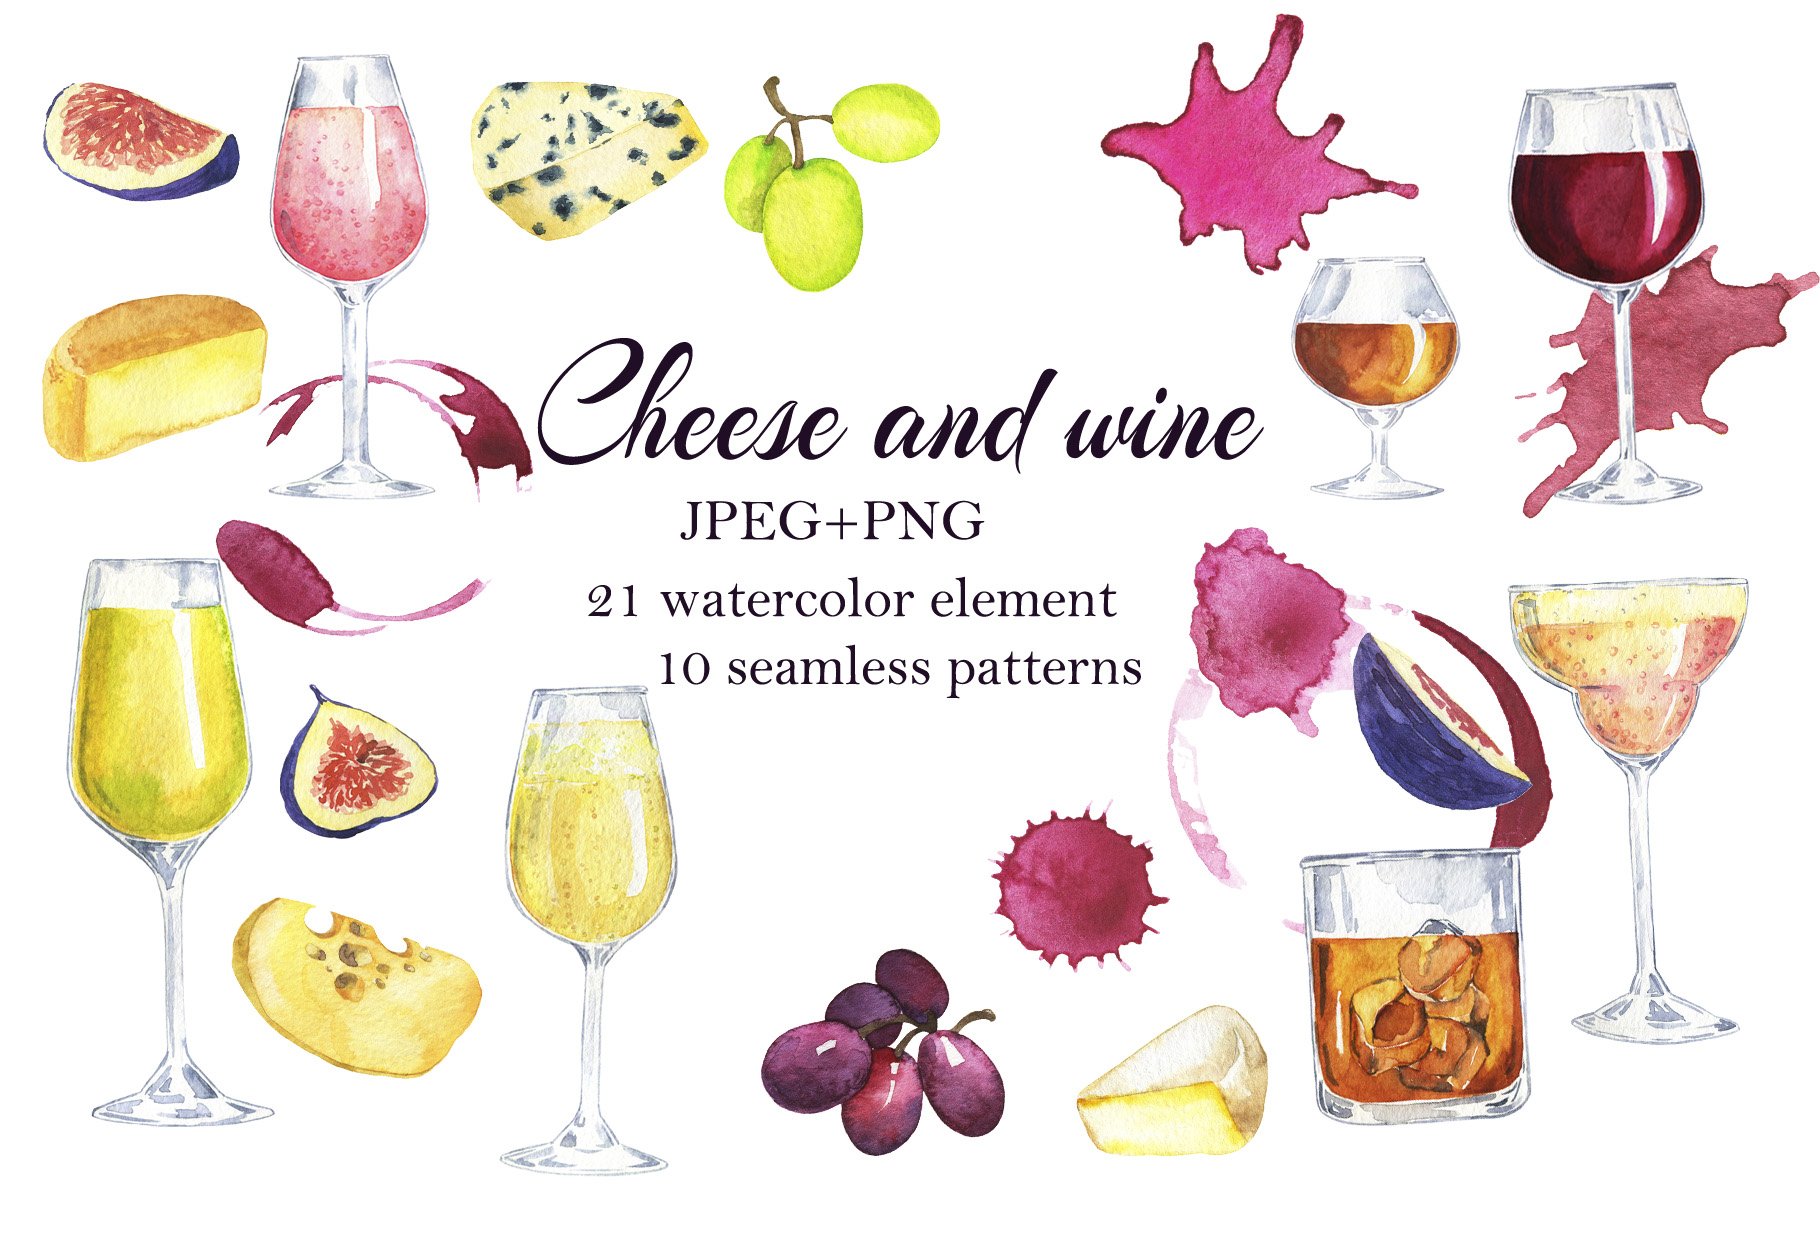 Cheese and wine watercolor cover image.